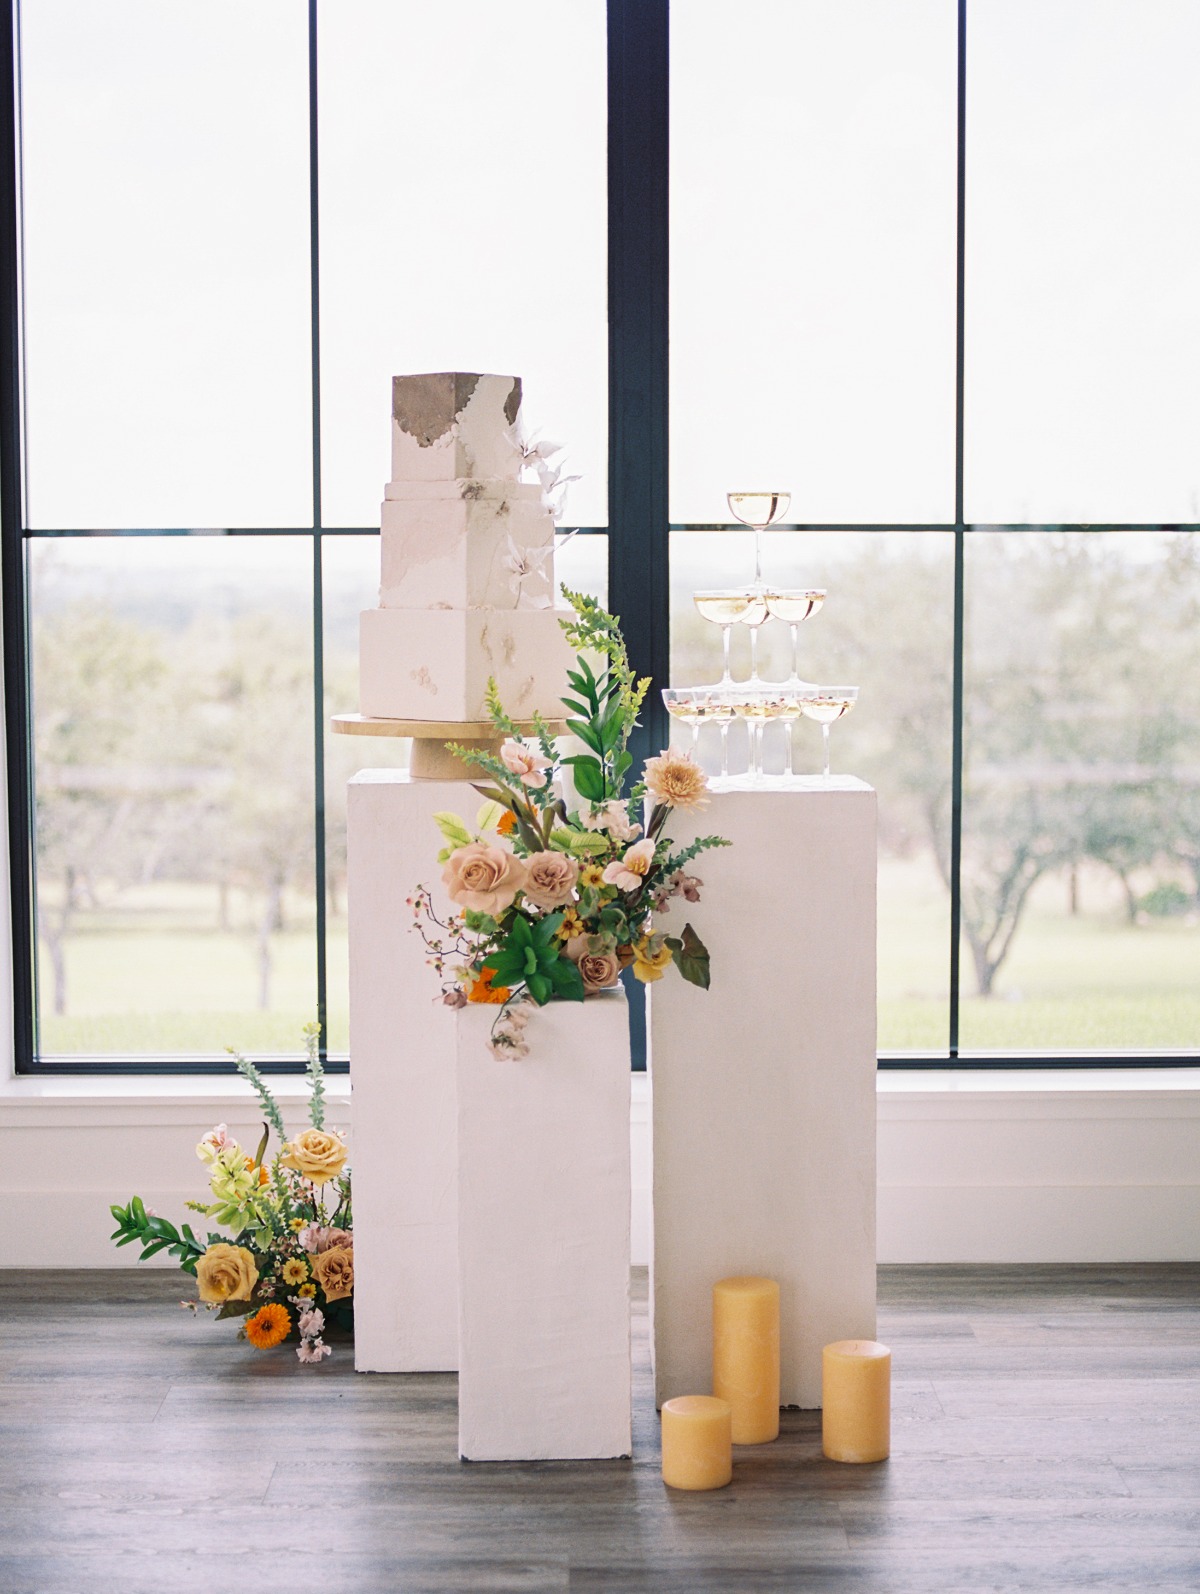 Wedding cake, floral arrangement and mini champagne tower on columns